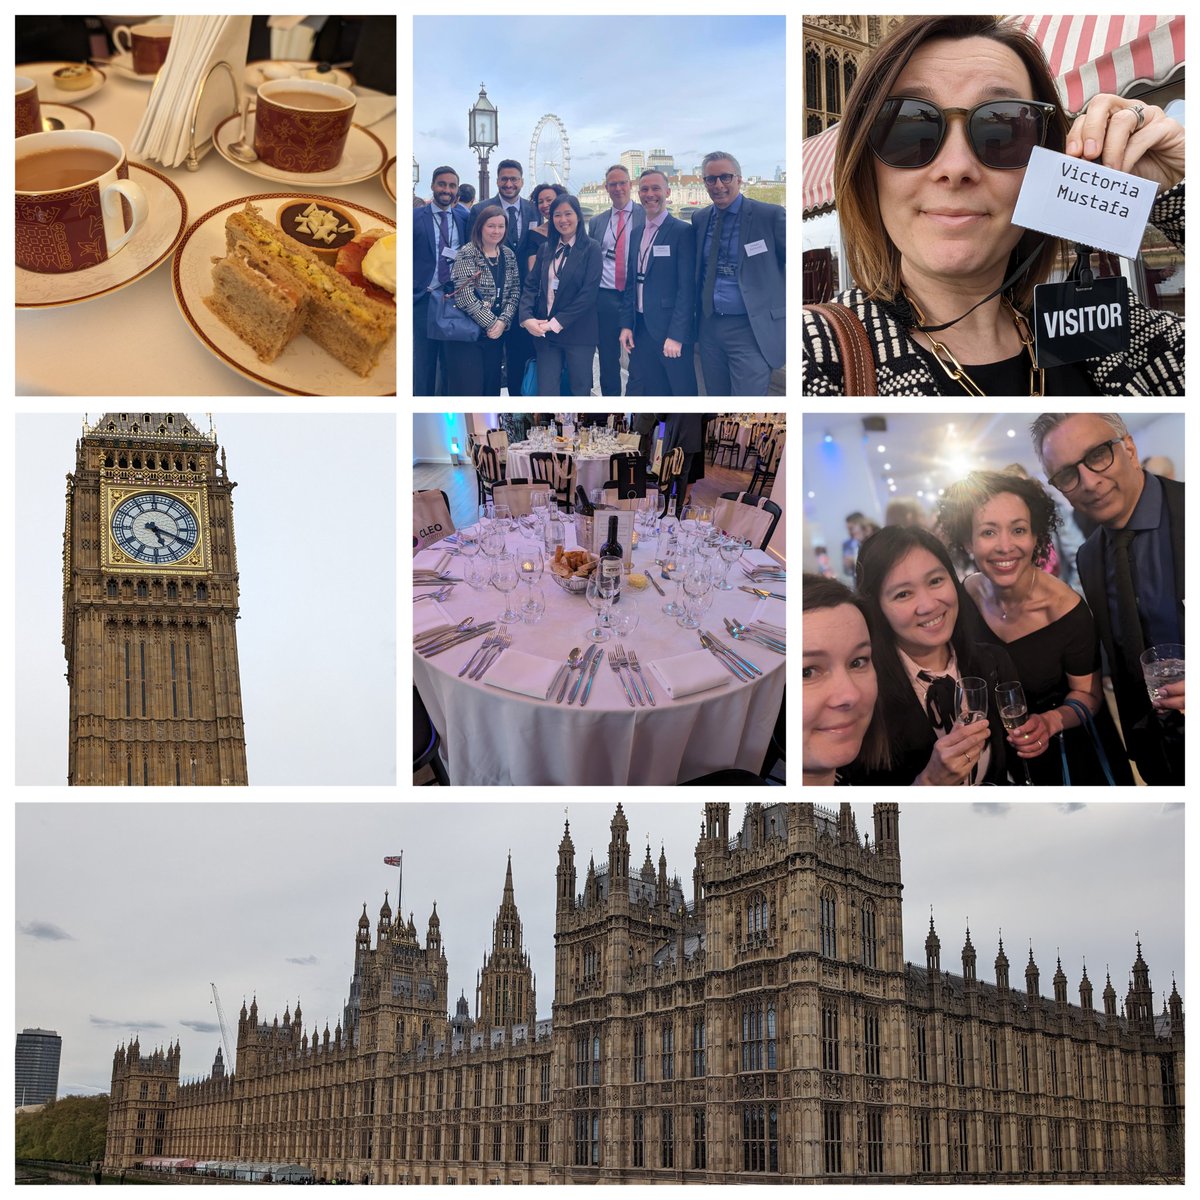 Had a fabulous day at the #HouseOfLords and #OxOTower celebrating my @DigHealthLeader year 1 completion. I have to say the best part was listening to @jamesfreed5 rap 🎤 honoured to be a #DigitalHealthLeader along with like minded #DigitalPeeps 🤓